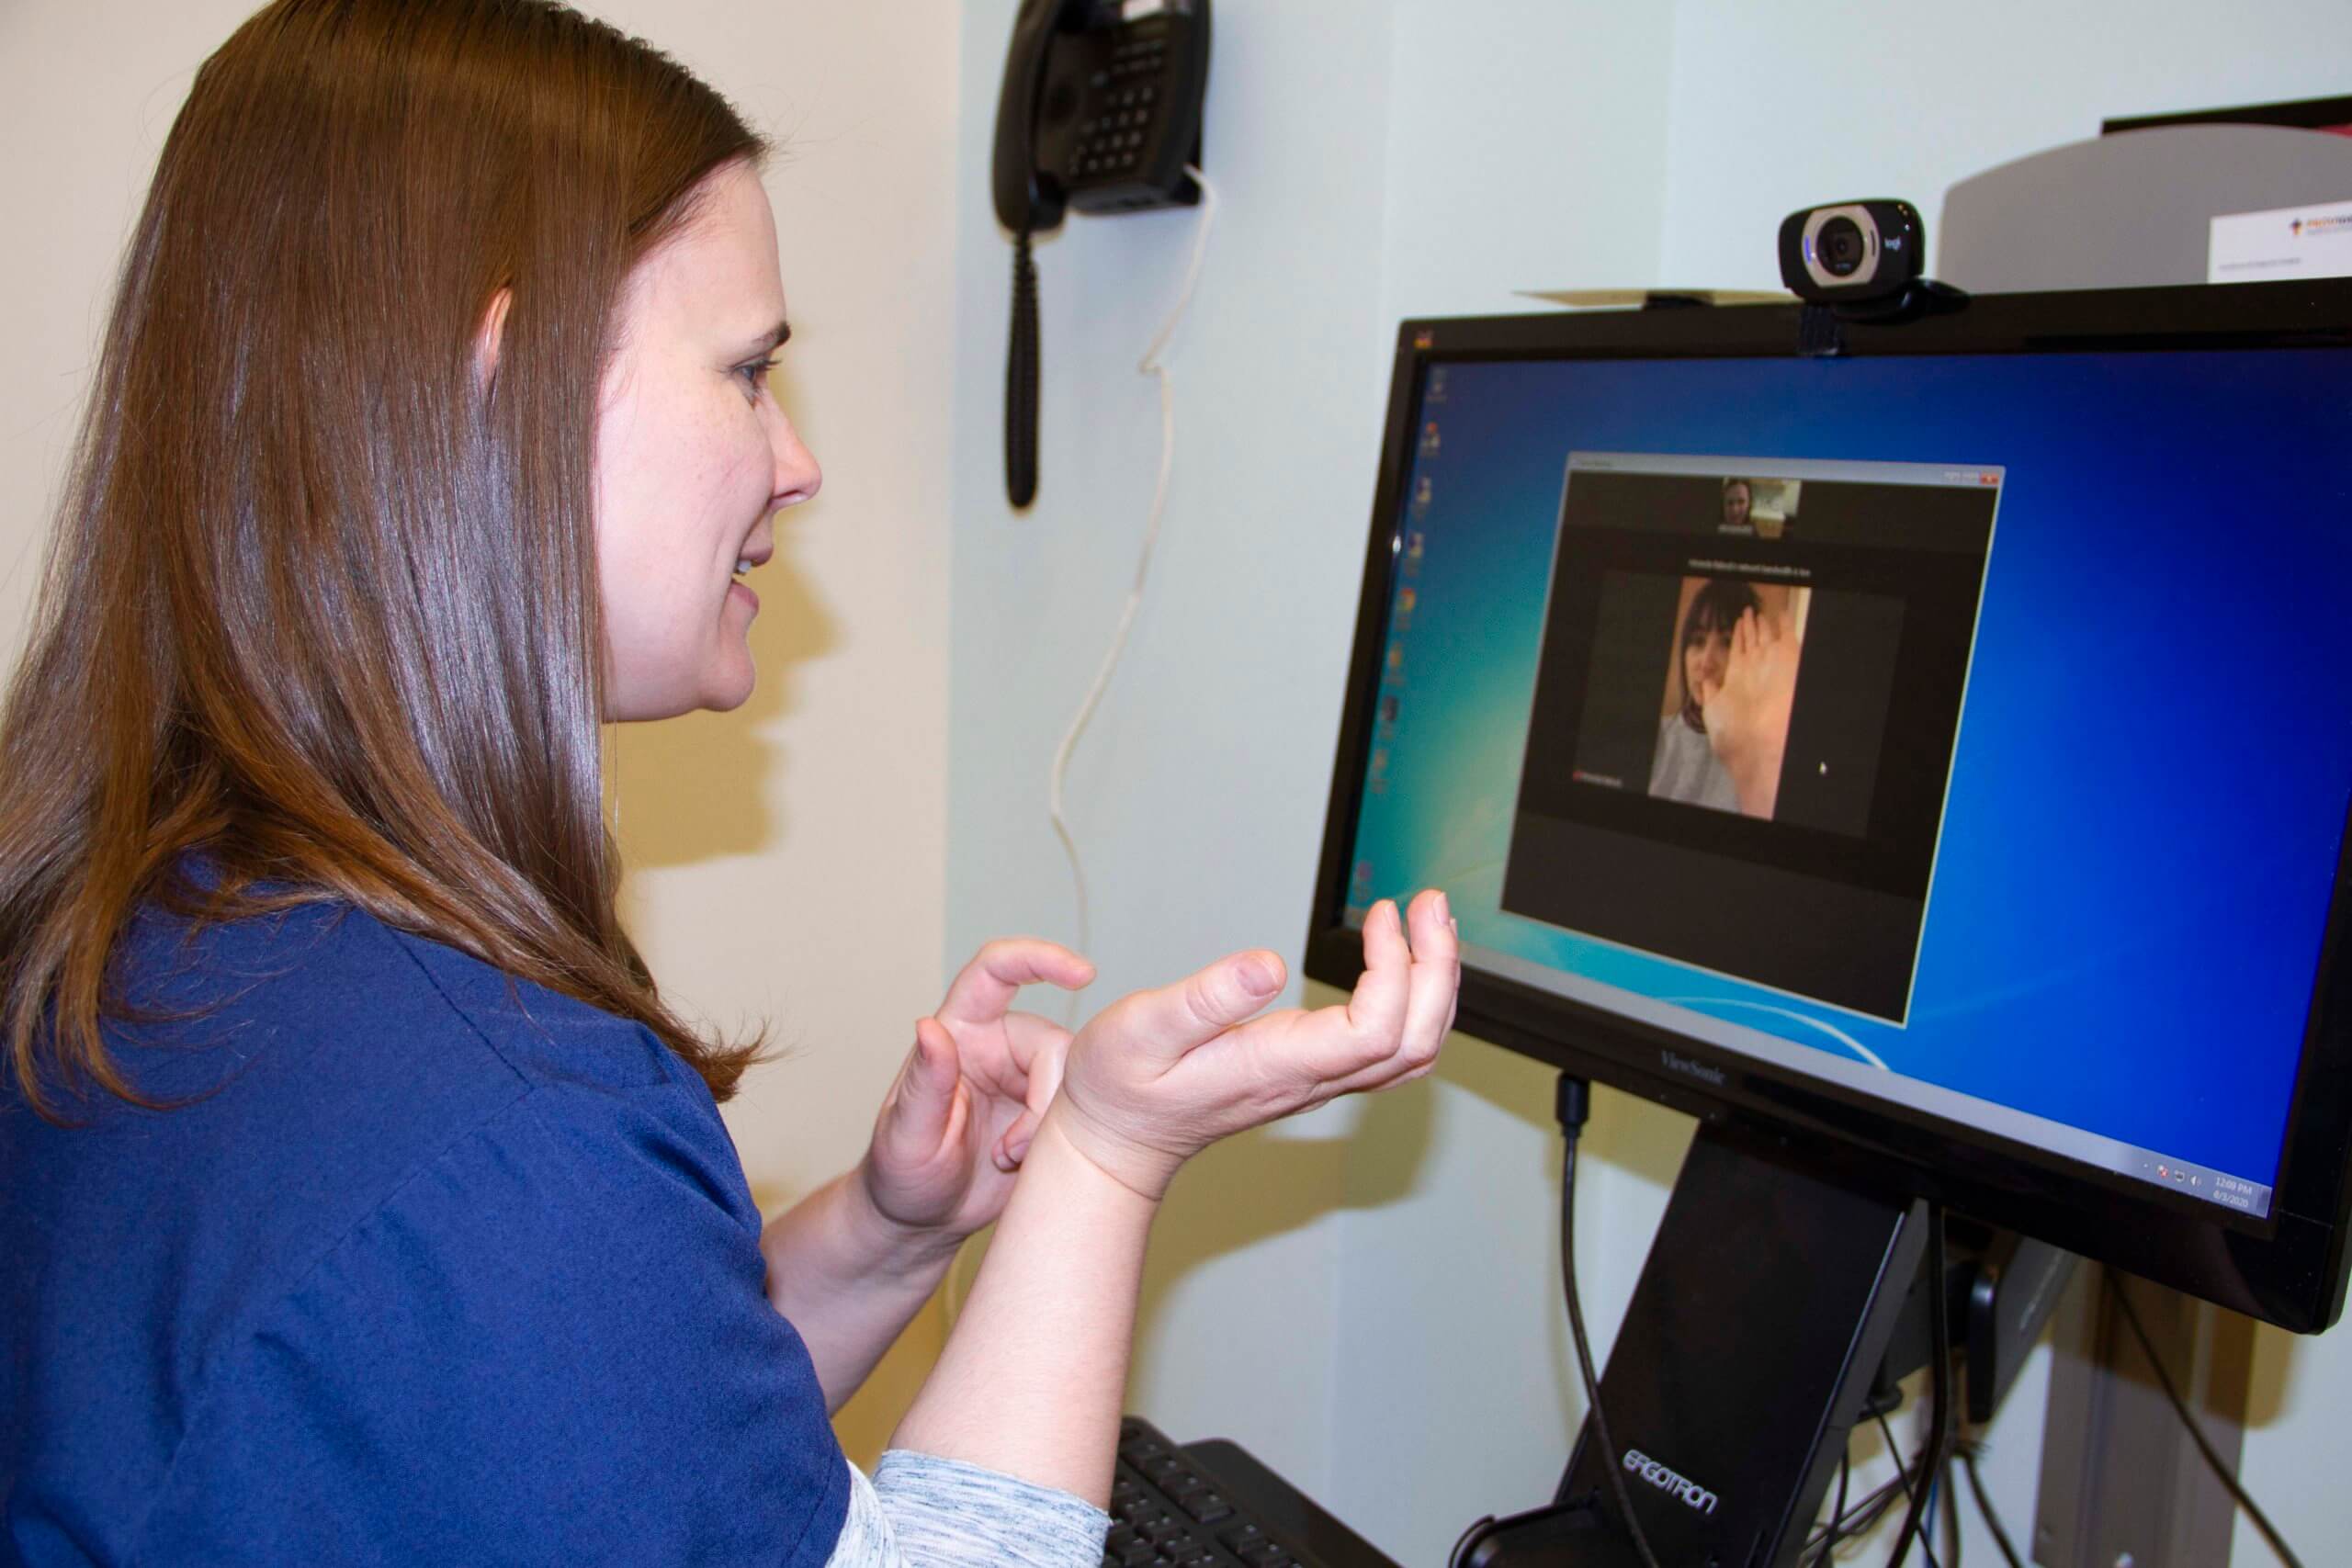 A provider meets with a patient via telehealth visit on the computer.